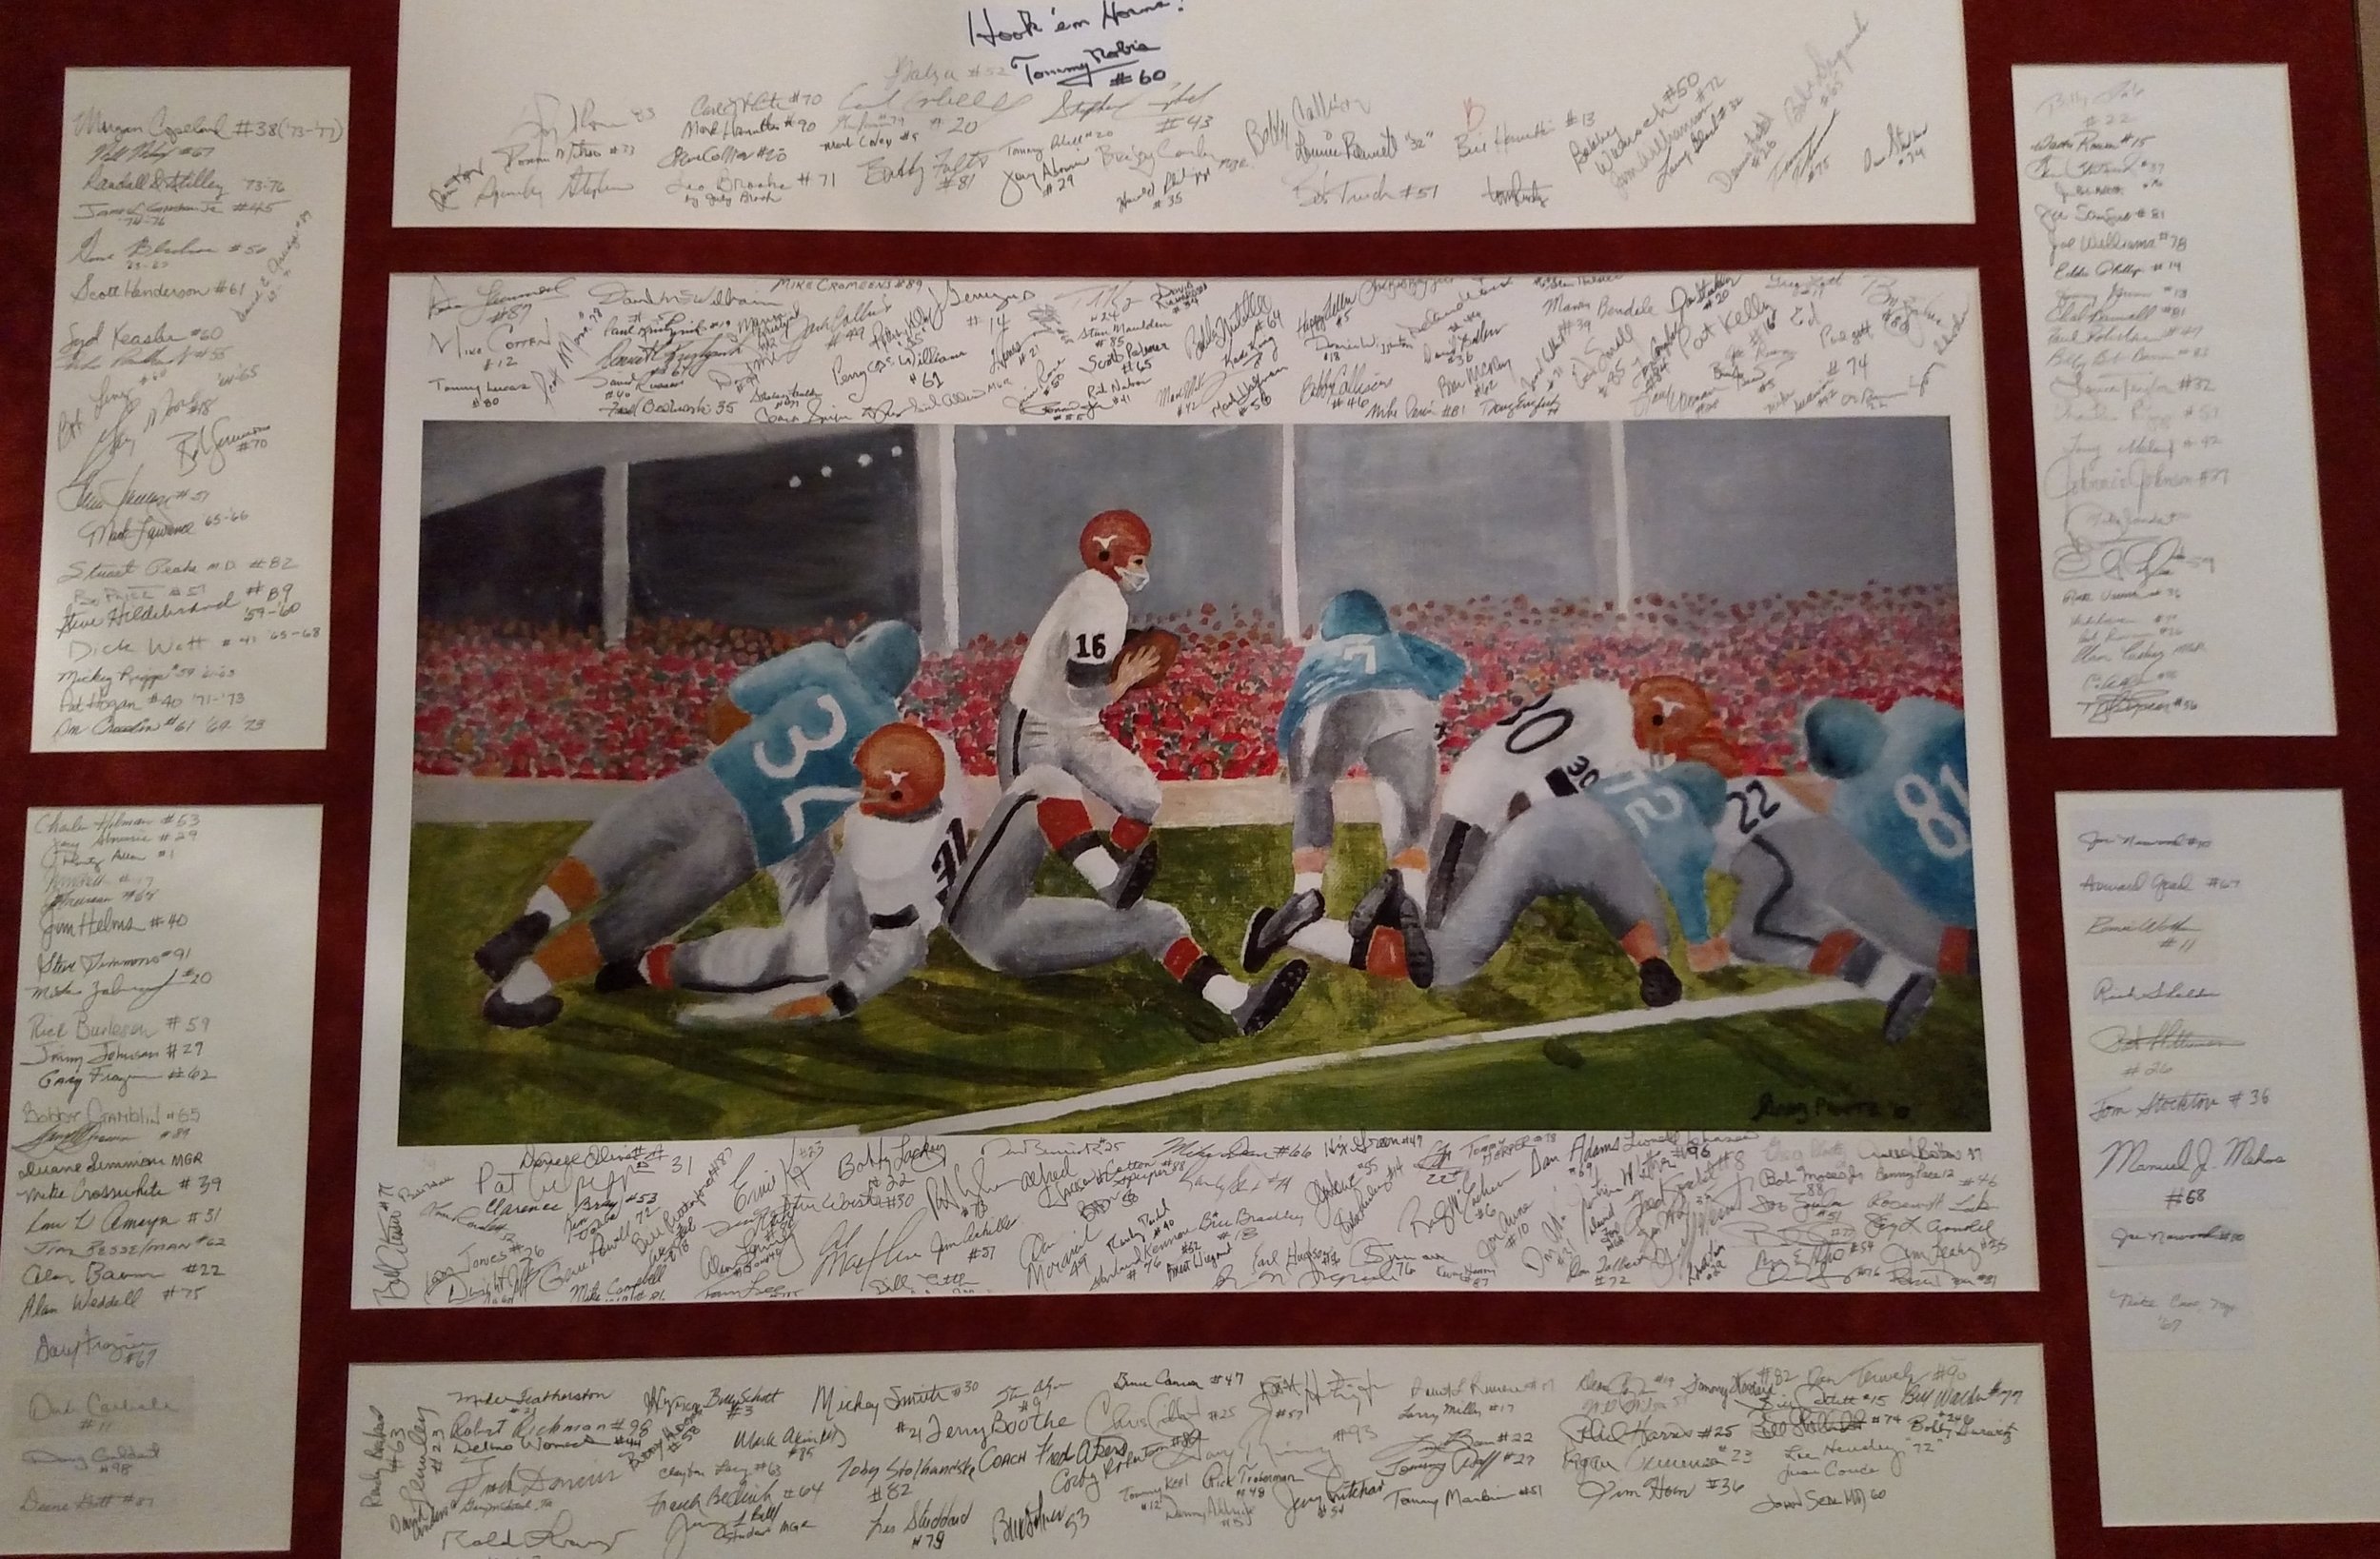 Ploetz painting signed by 250 DKR players will be auctioned this year.